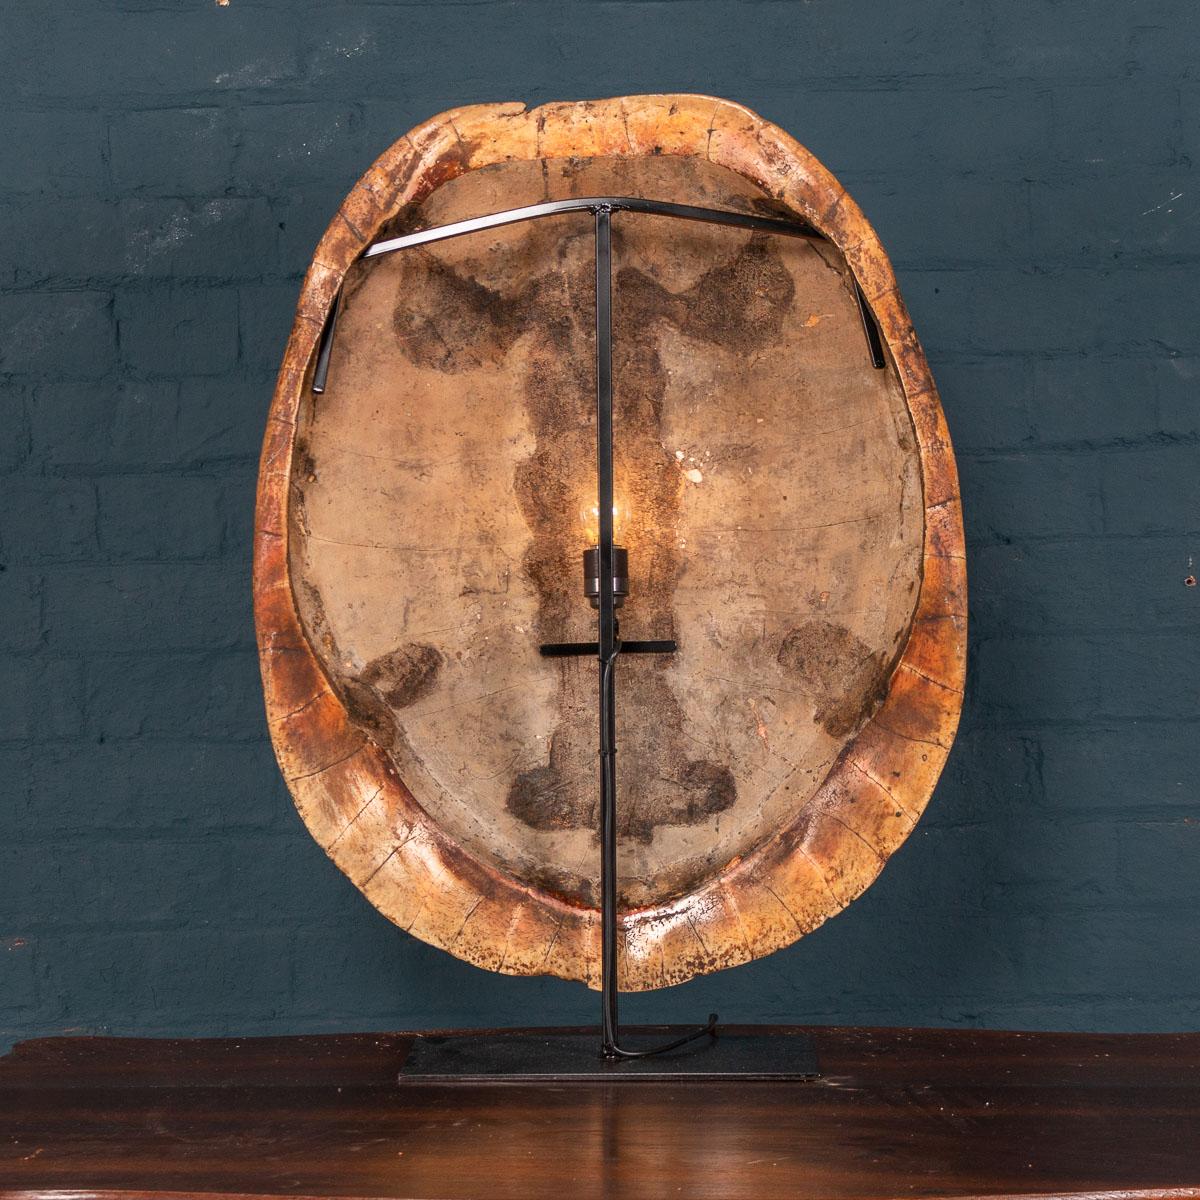 * * *Our company policy is not to ship any taxidermy items to the USA. We apologise from any inconvenience this may cause. * * *

A stunning late 19th century “blond” turtle shell. These turtle shells were South American river turtles and would be